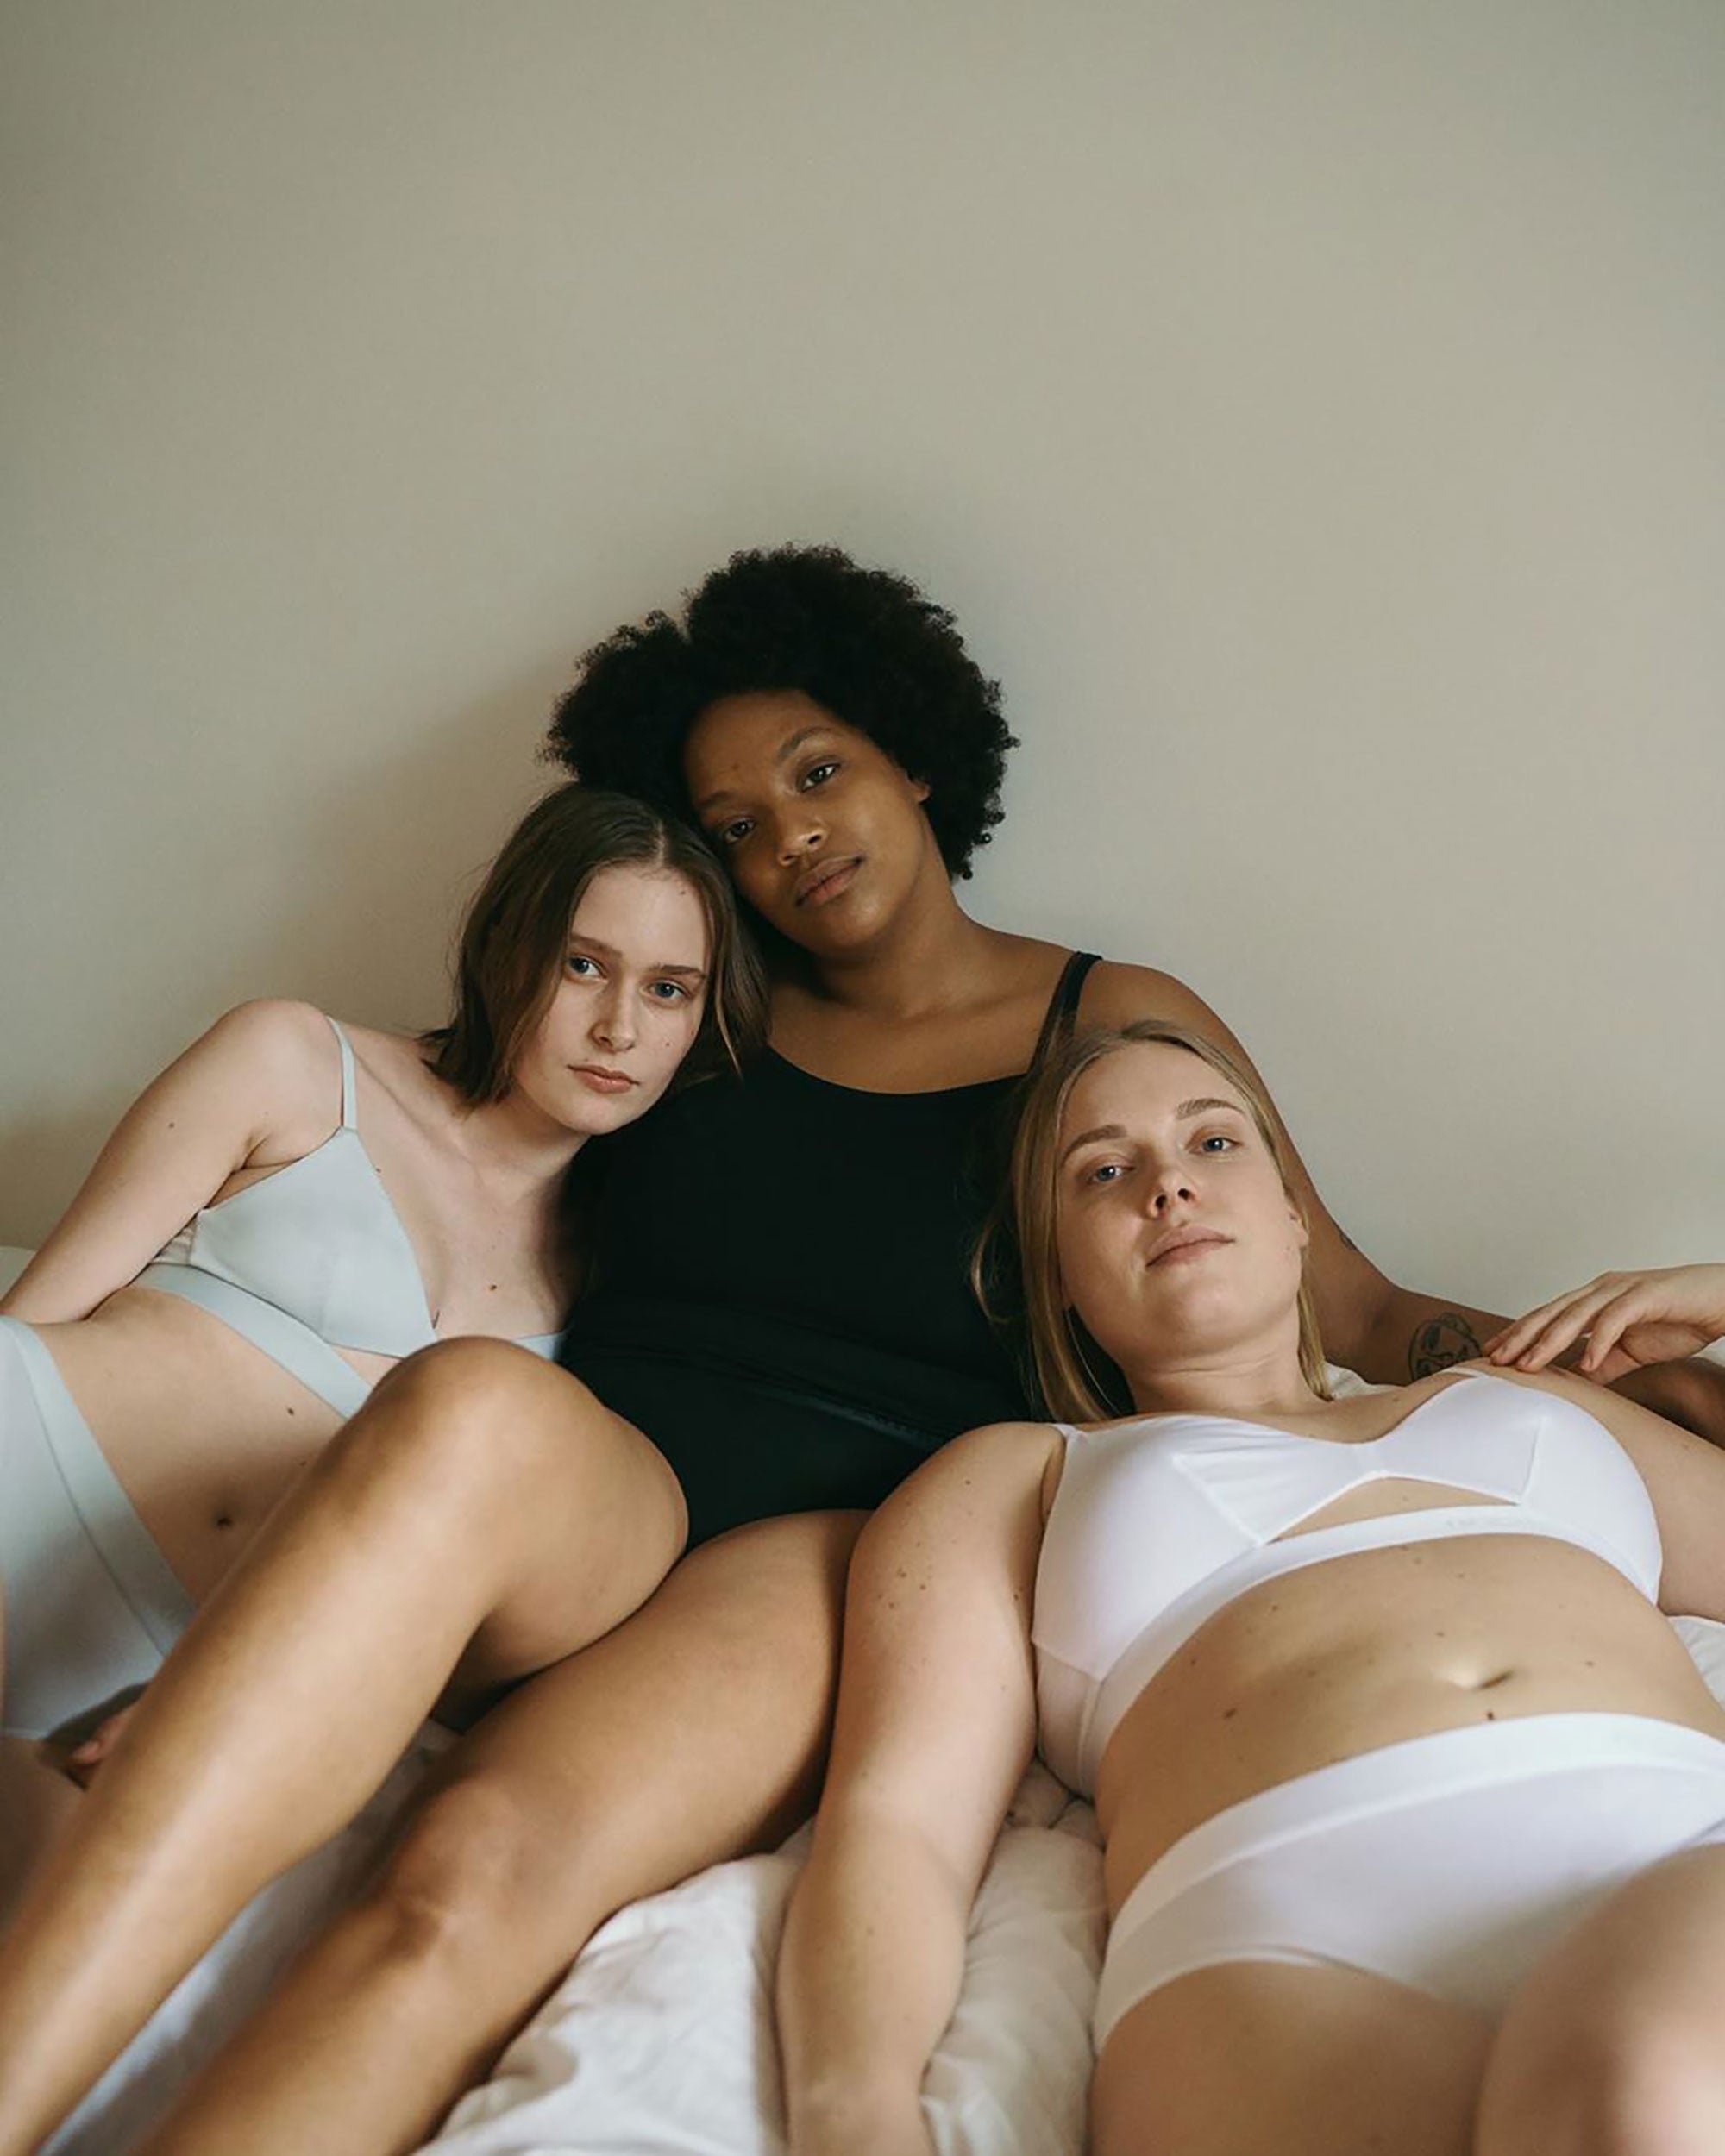 The Best Sustainable Stylish Lingerie Brands For Women